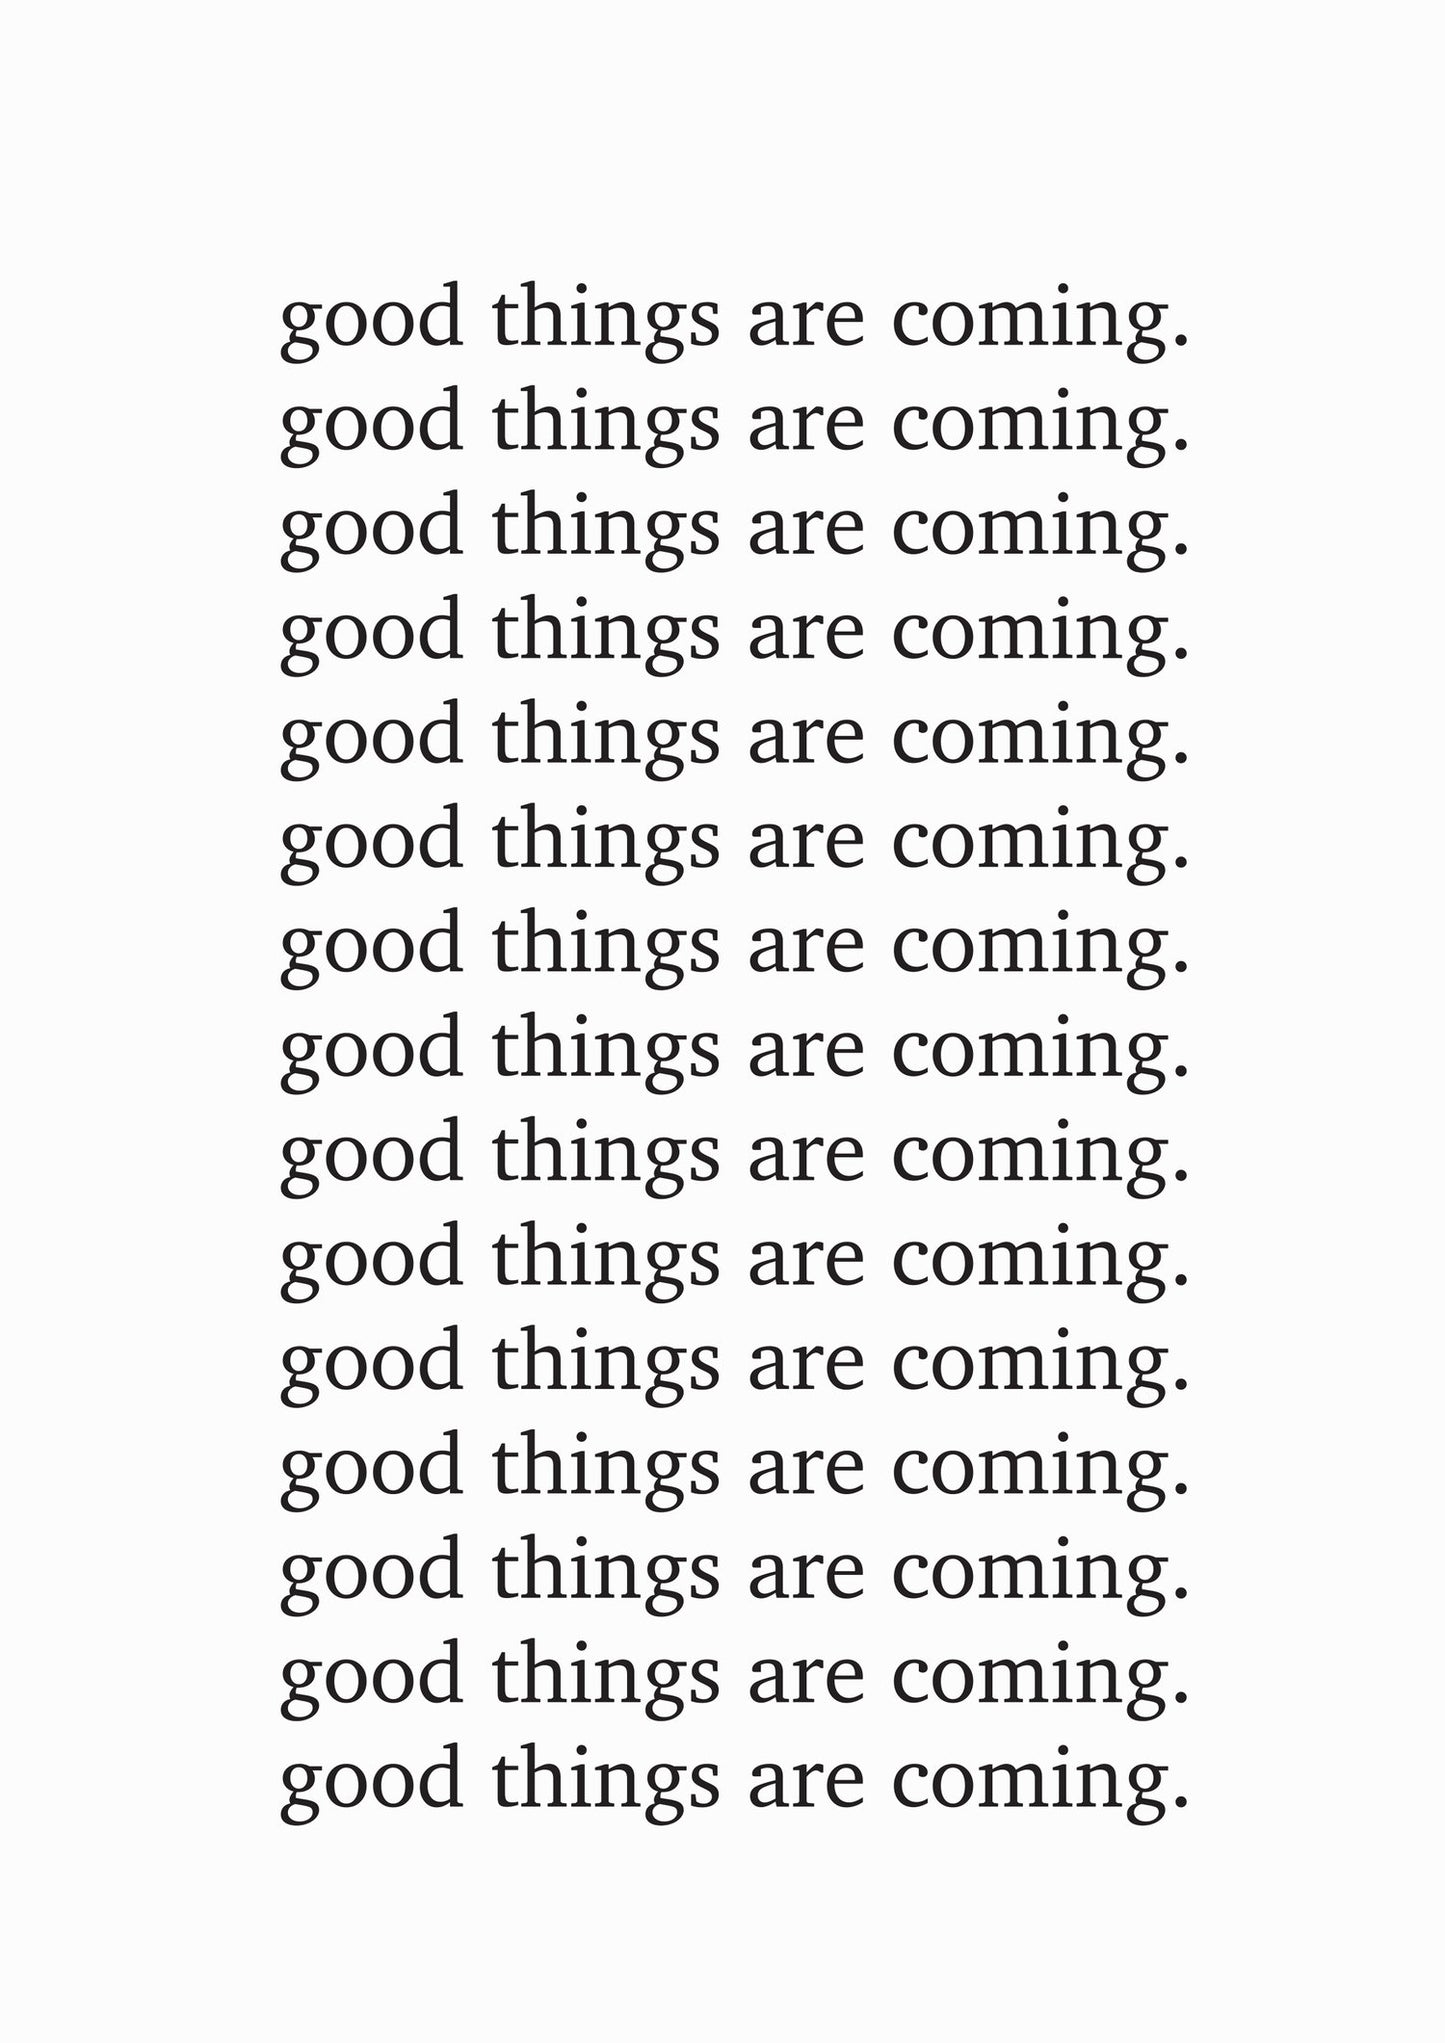 Art Print - Good Things Are Coming